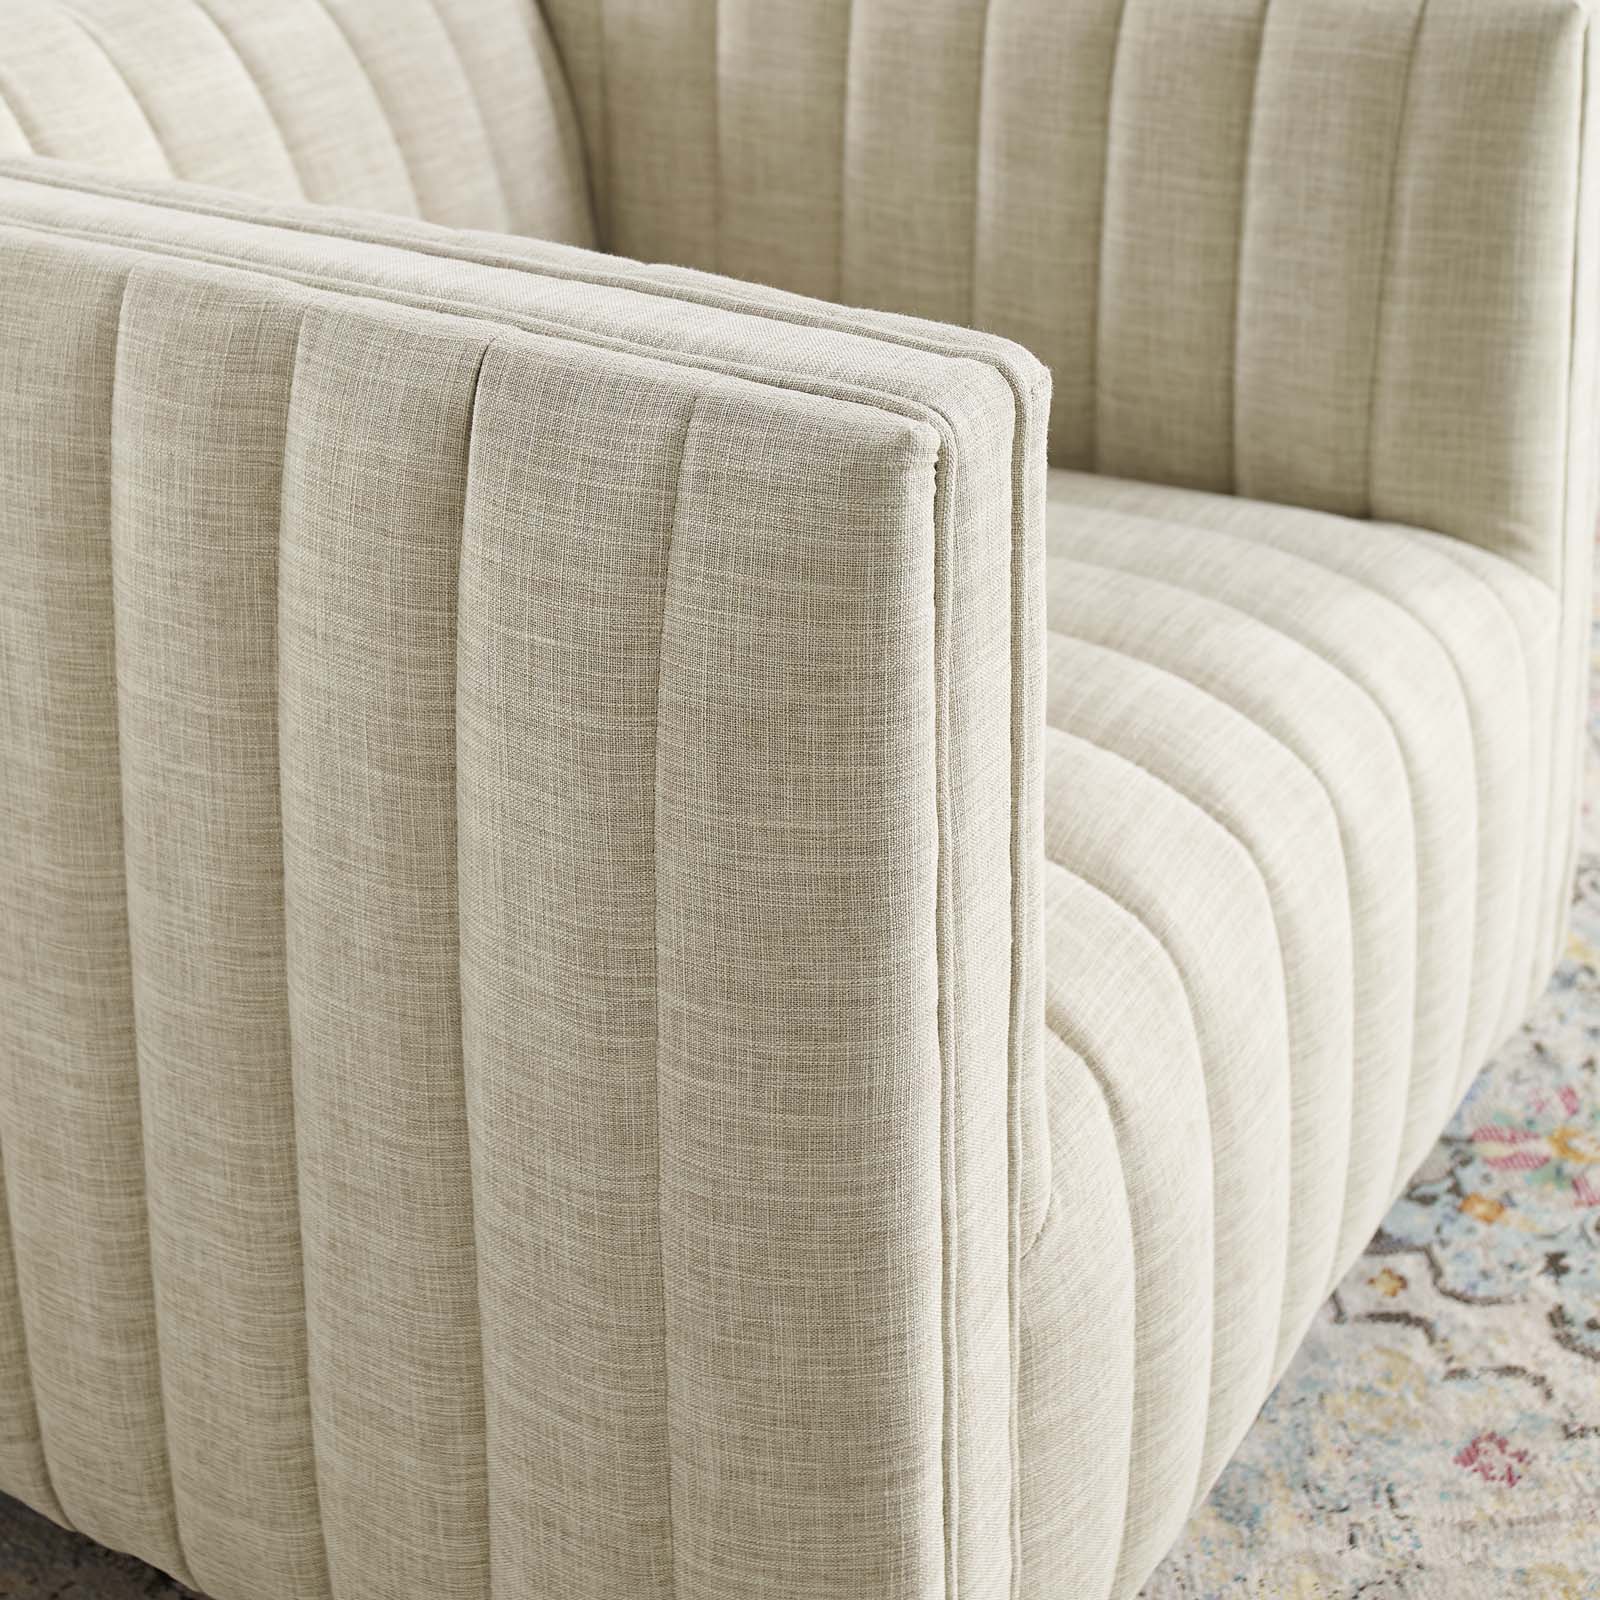 Modway Accent Chairs - Conjure Tufted Swivel Upholstered Armchair Beige